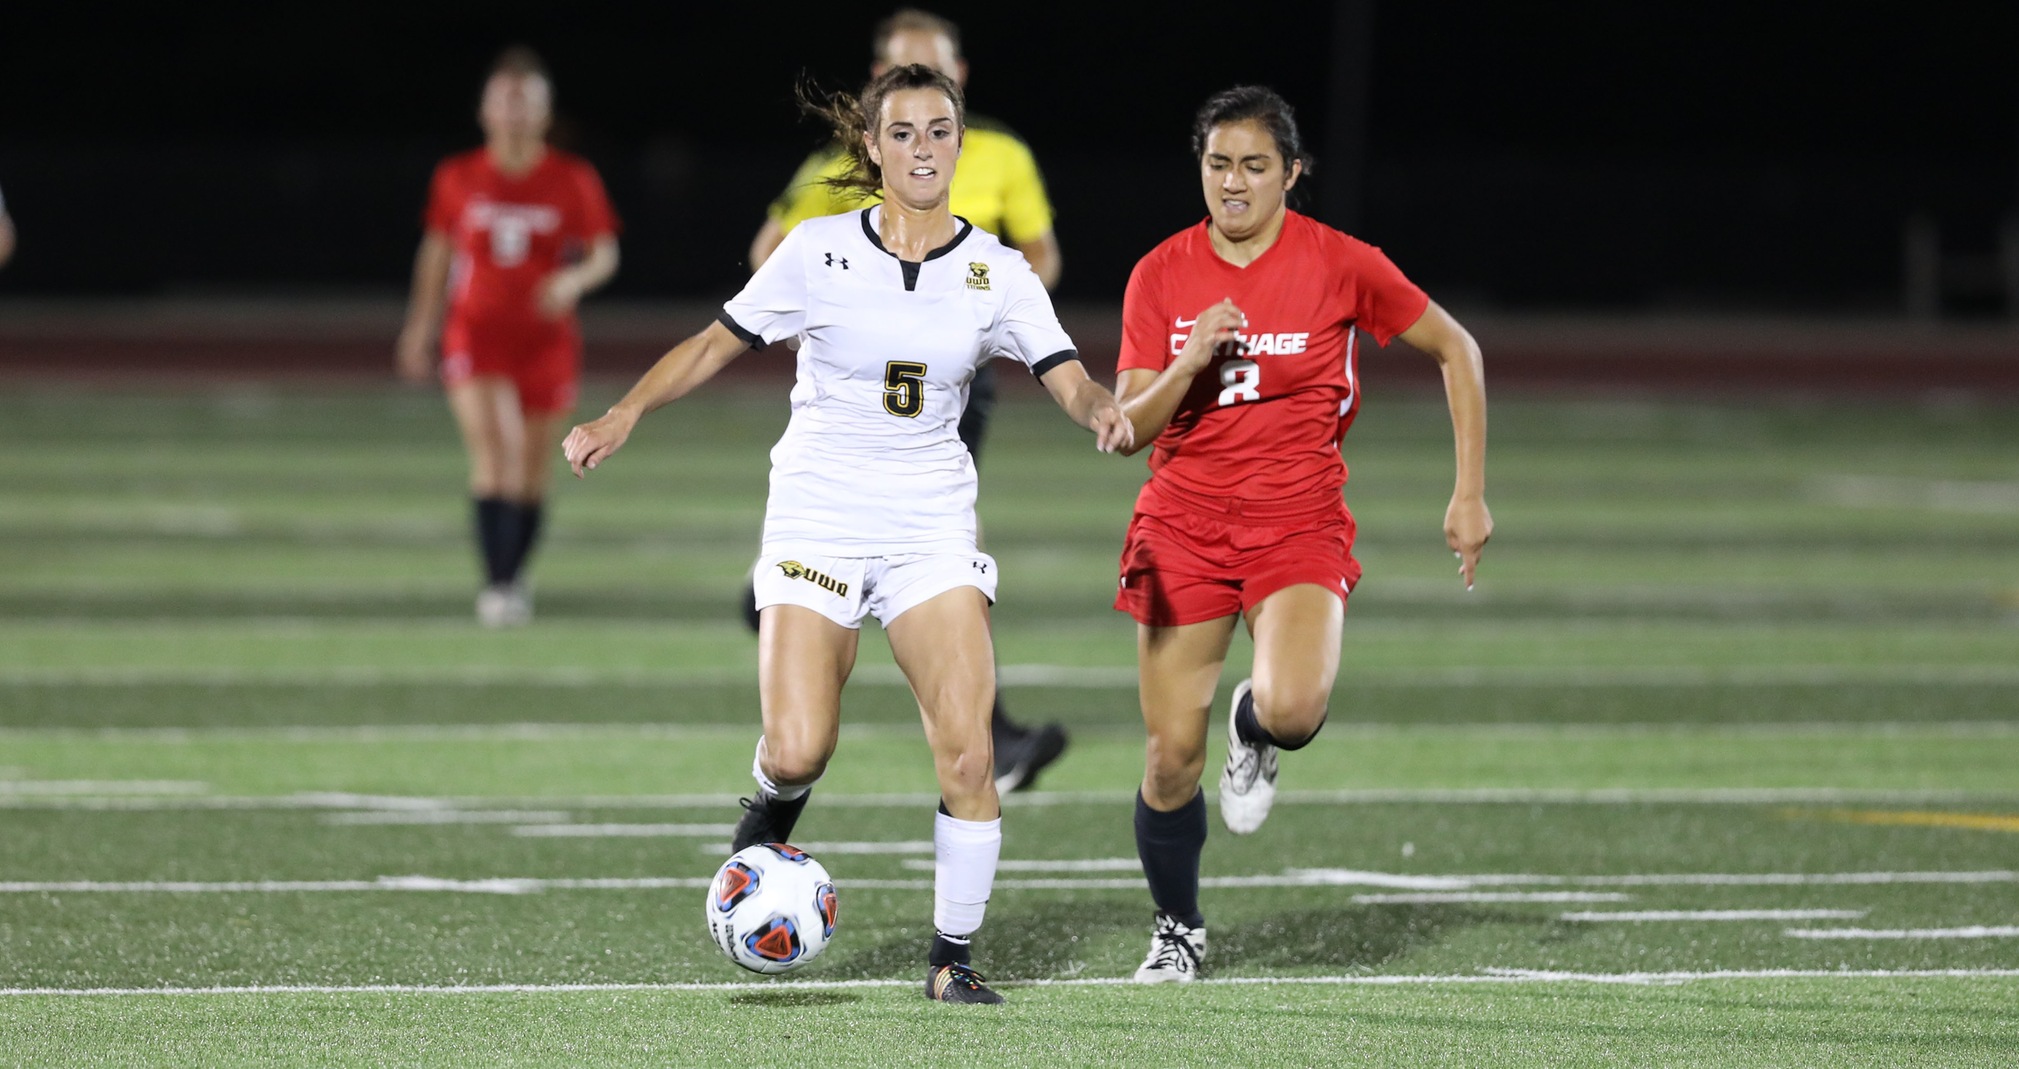 Addie Schmitz scored the match-tying goal for the Titans during the 83rd minute of activity.